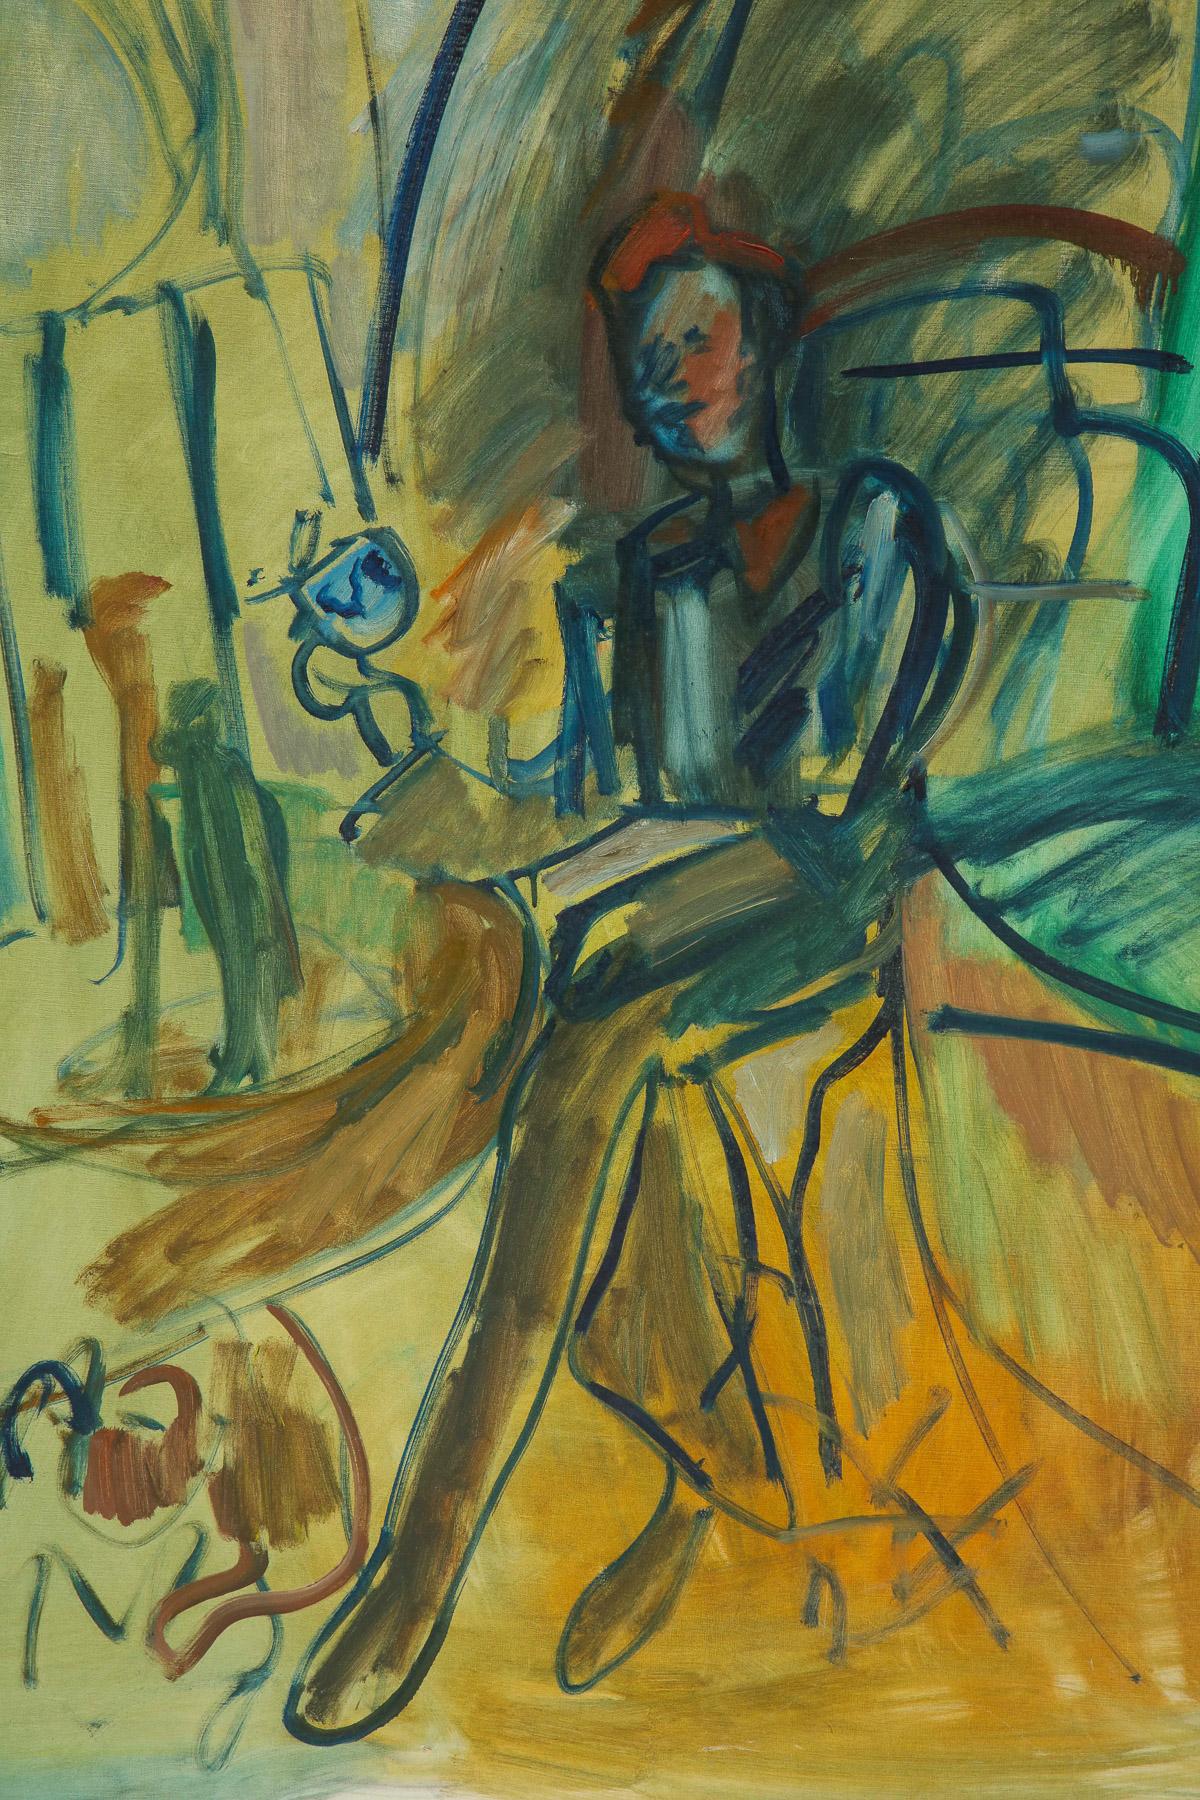 Large green, mid-century painting with a sitting person, circa 1960.